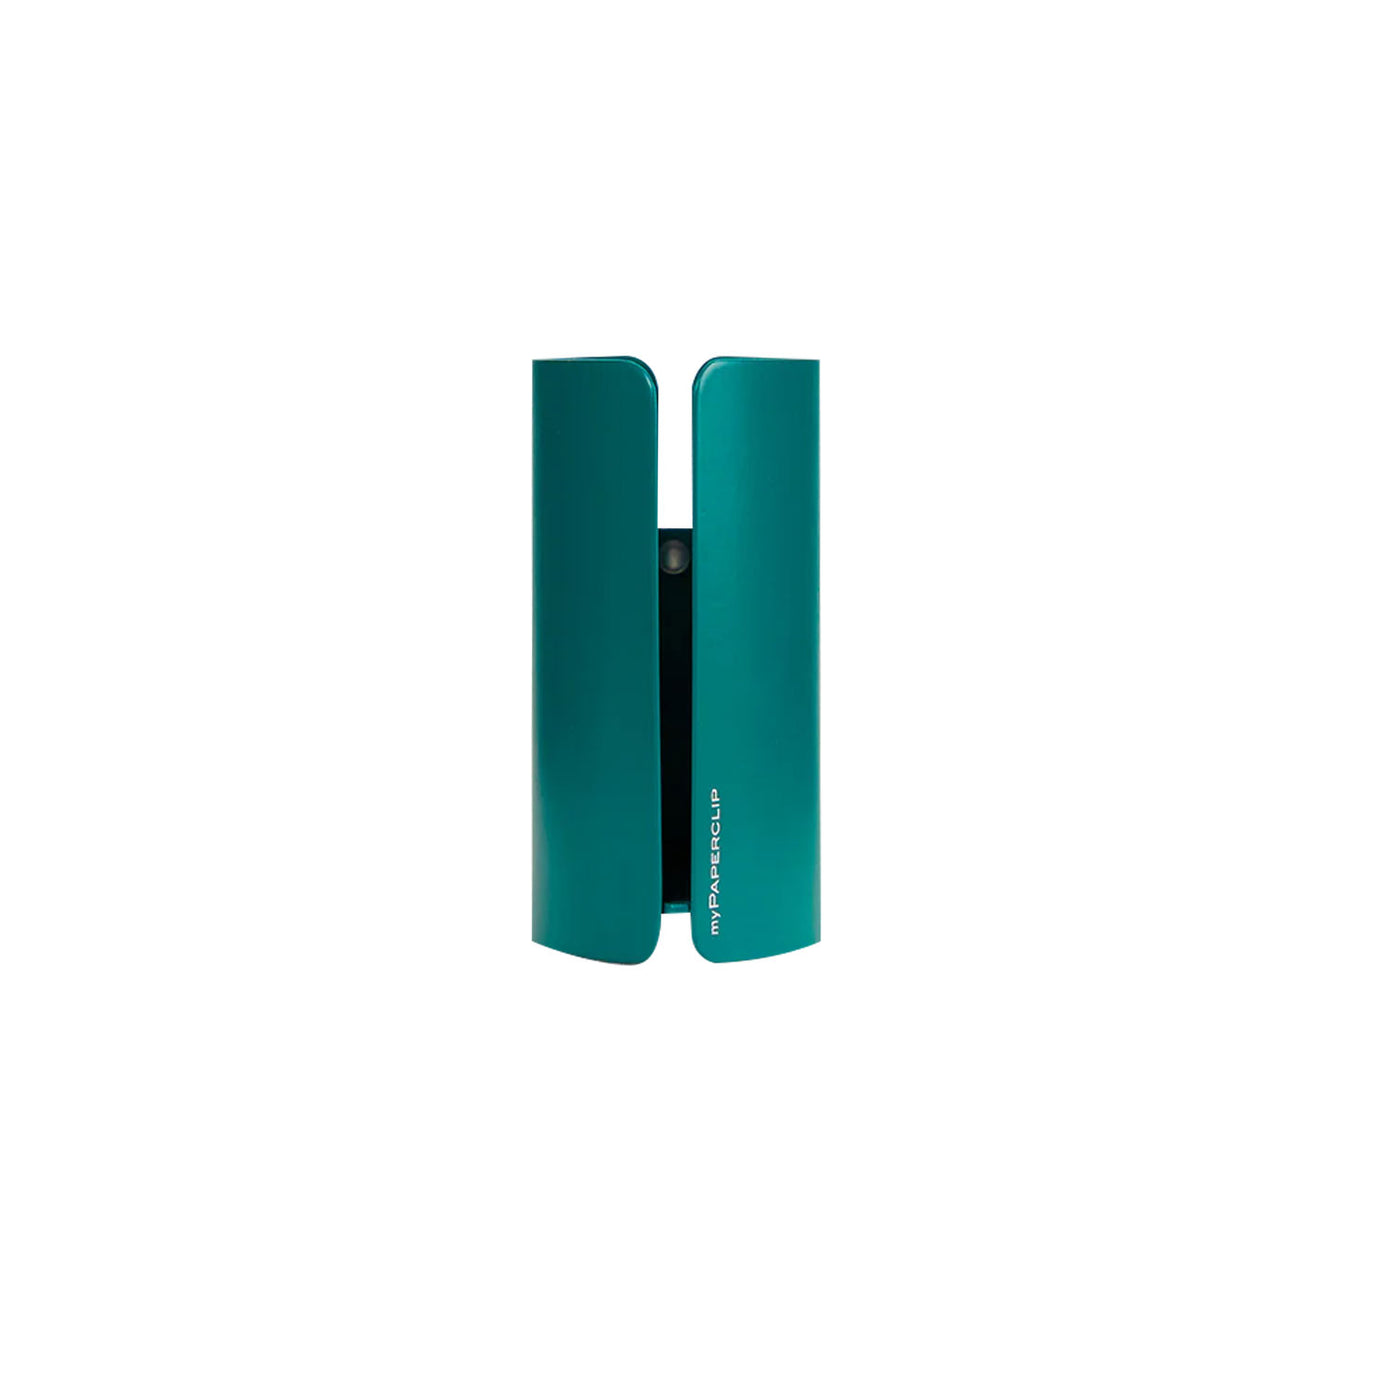 myPAPERCLIP Metal Pen Stand - Green